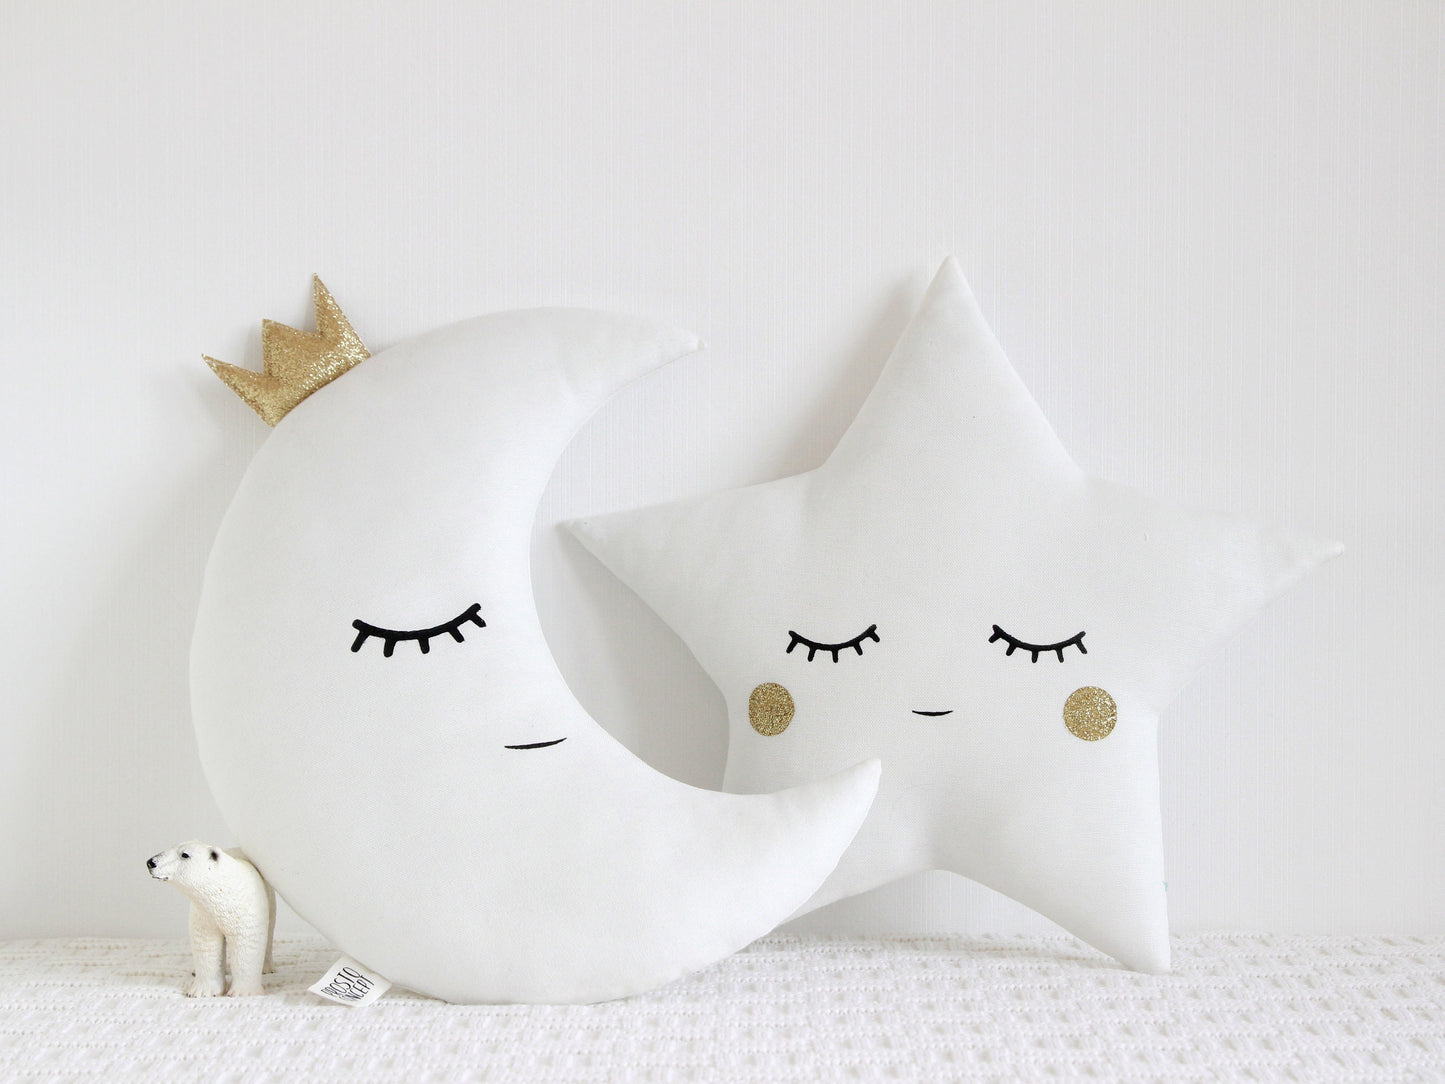 Set of 2 White Pillows - Crescent Moon and Star Pillows with Glitter Touch (5 colors)